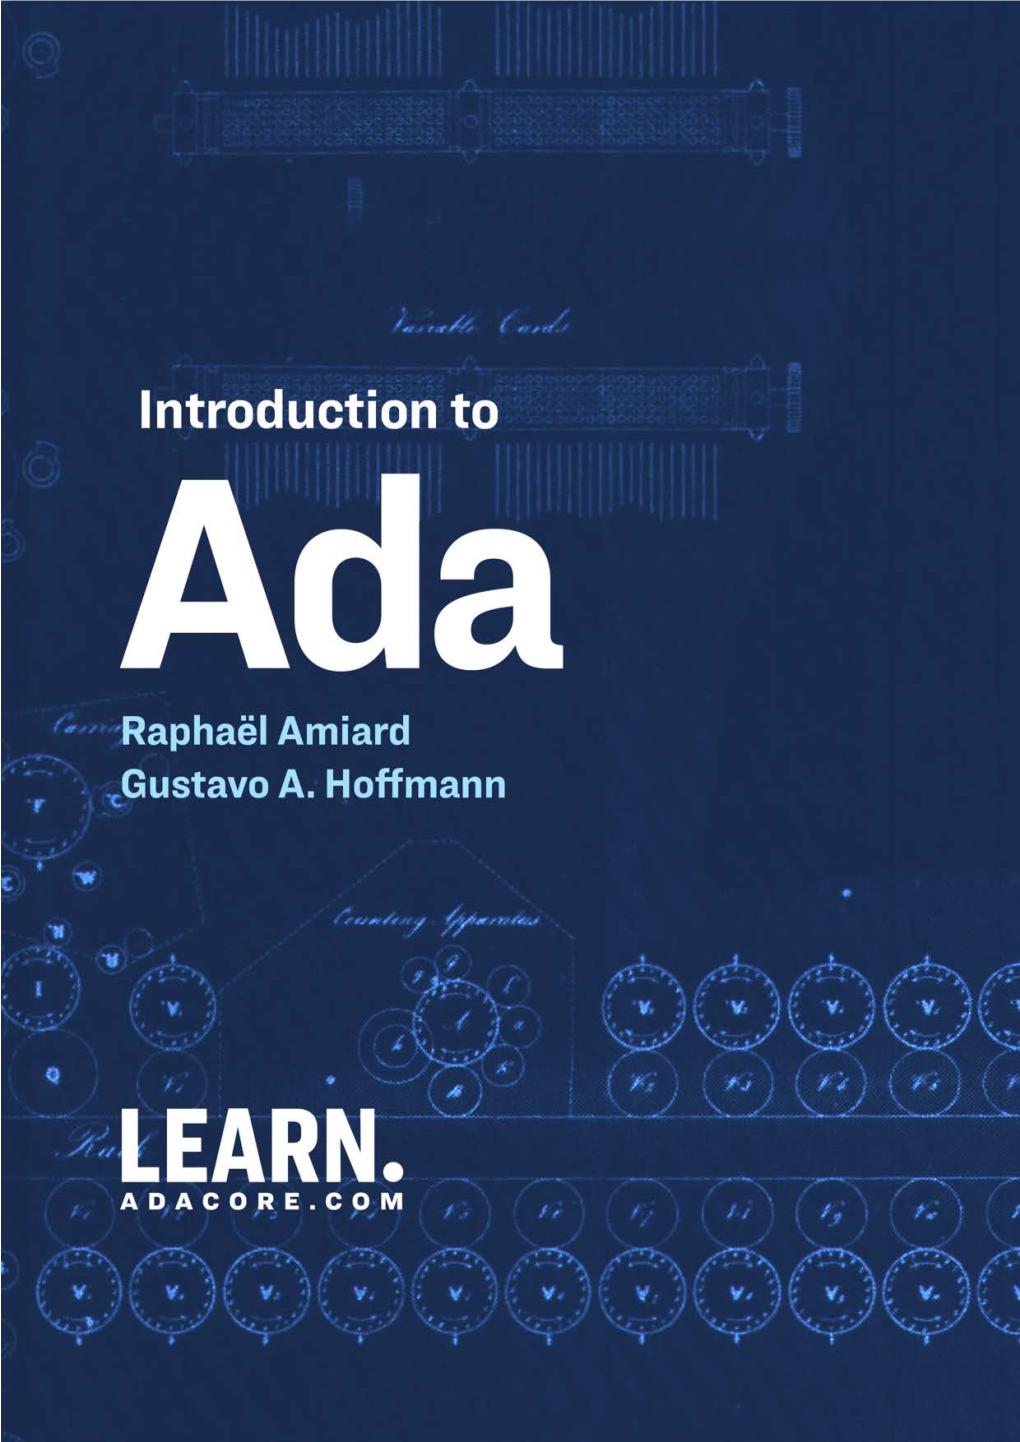 Introduction to Ada (PDF)